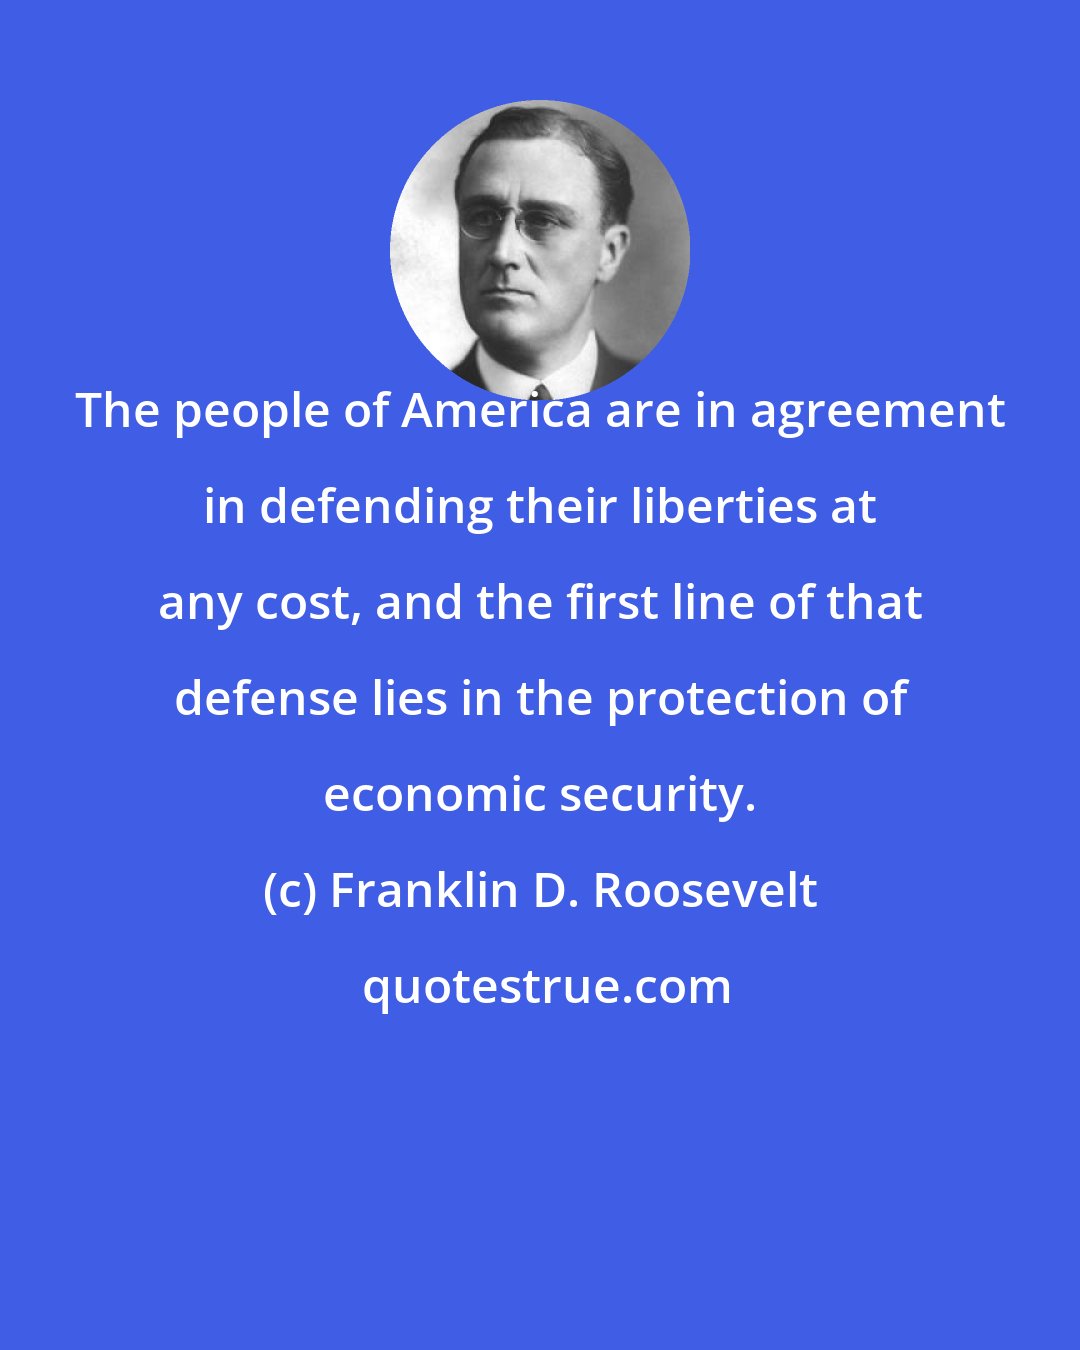 Franklin D. Roosevelt: The people of America are in agreement in defending their liberties at any cost, and the first line of that defense lies in the protection of economic security.